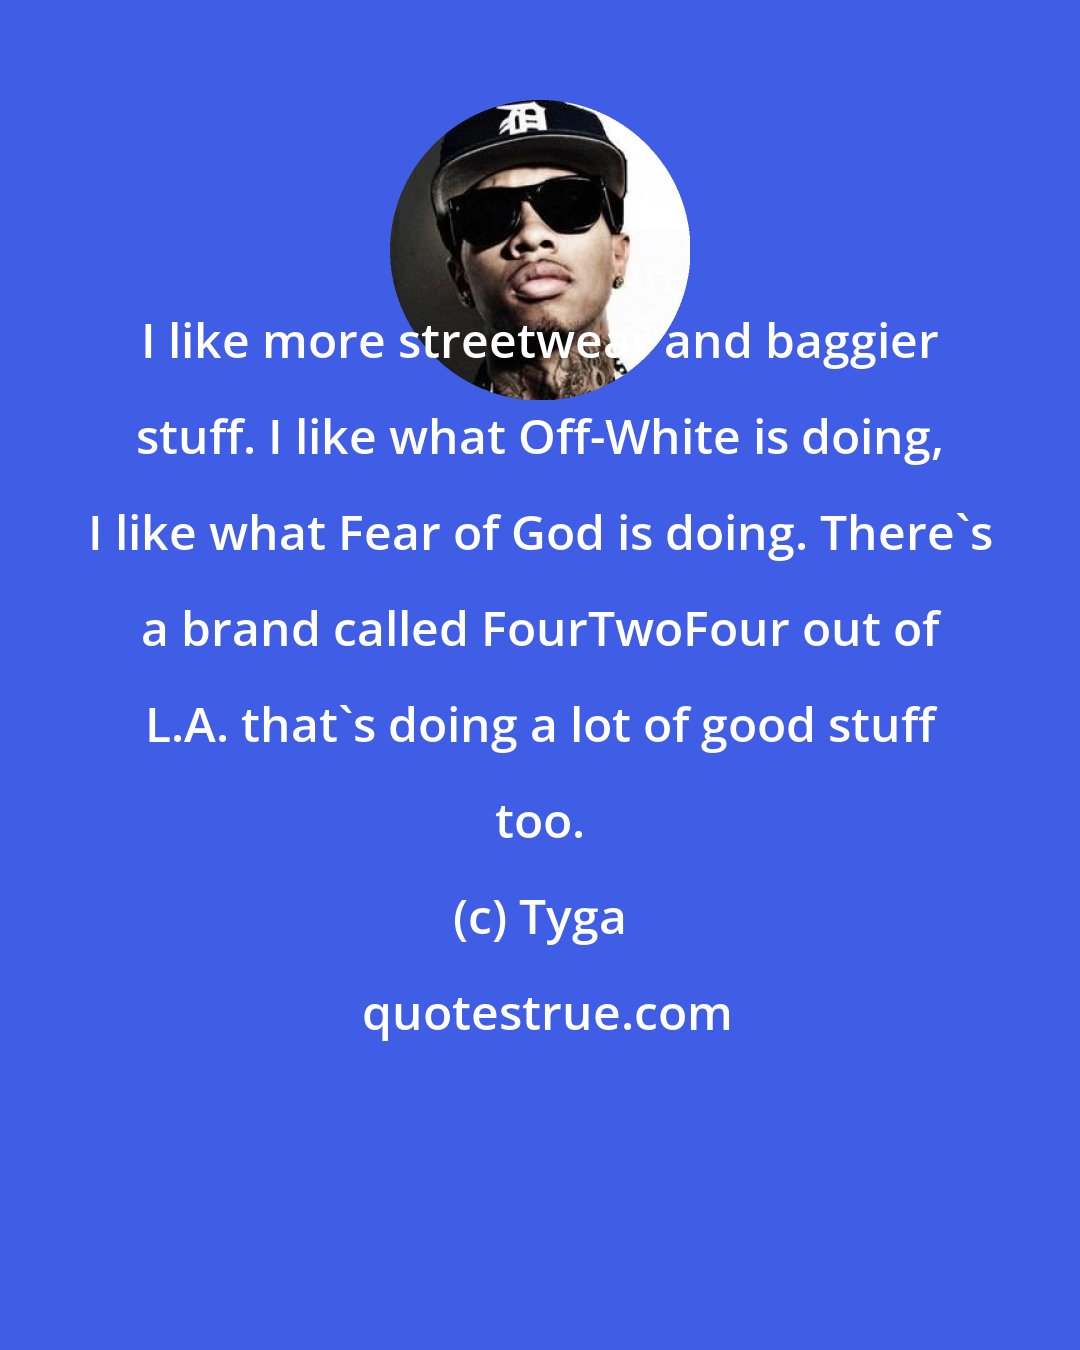 Tyga: I like more streetwear and baggier stuff. I like what Off-White is doing, I like what Fear of God is doing. There's a brand called FourTwoFour out of L.A. that's doing a lot of good stuff too.